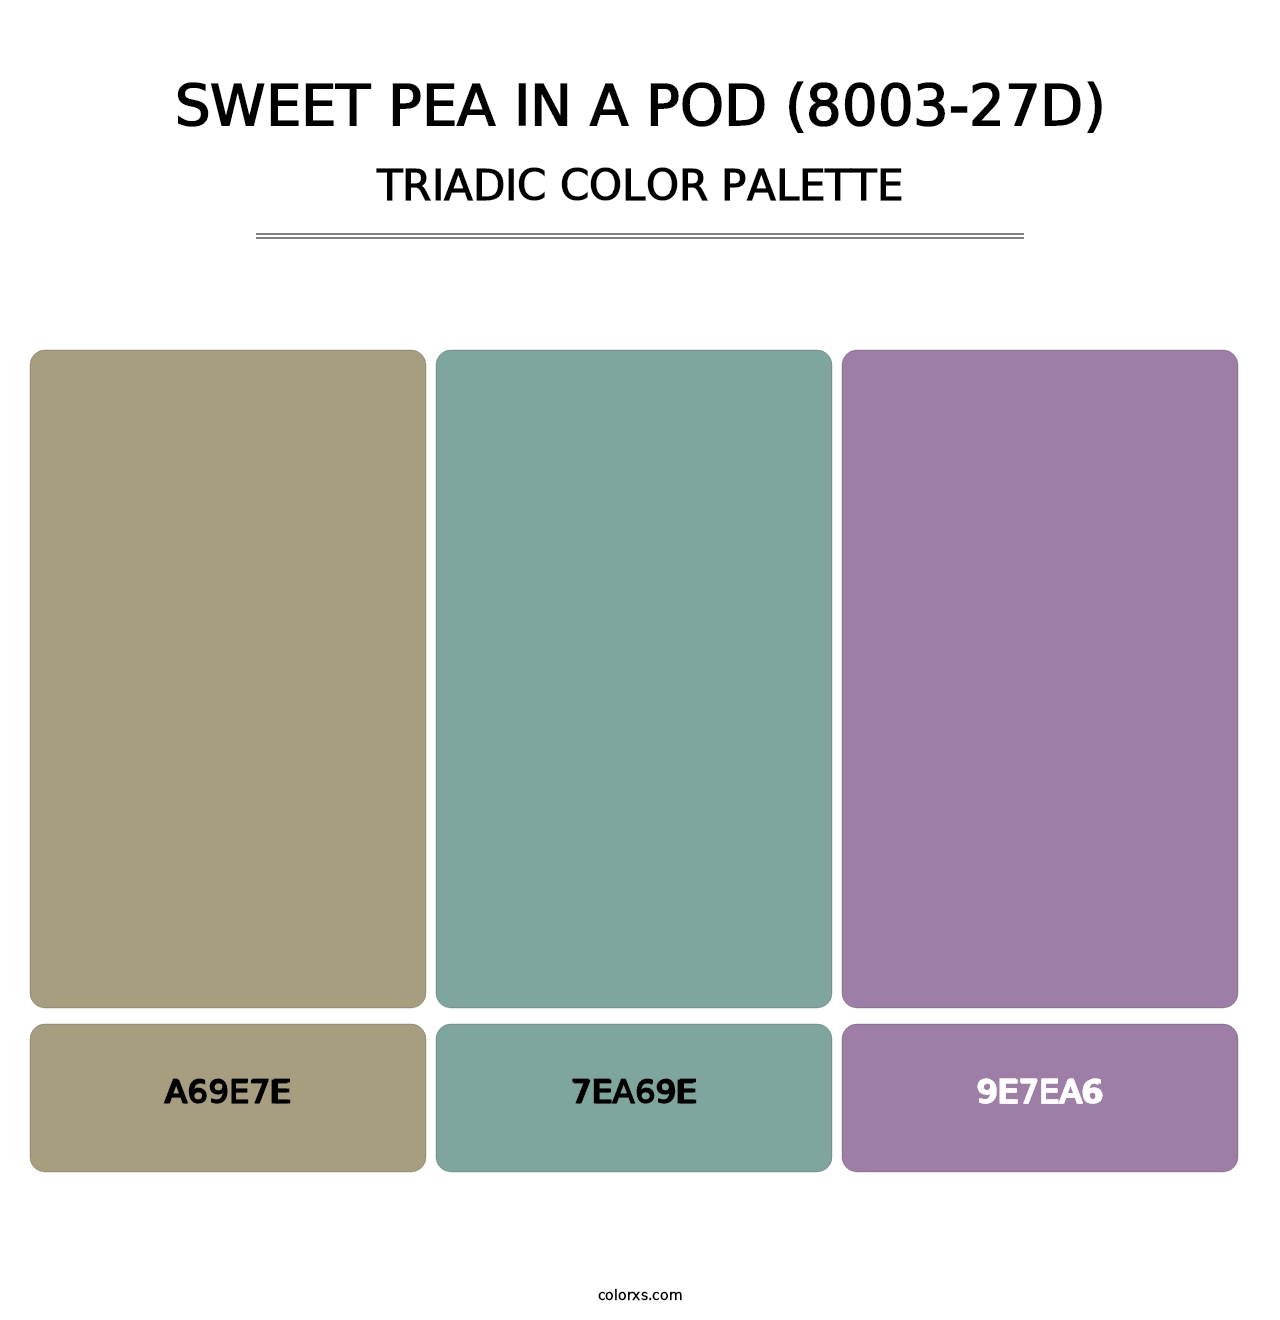 Sweet Pea in a Pod (8003-27D) - Triadic Color Palette